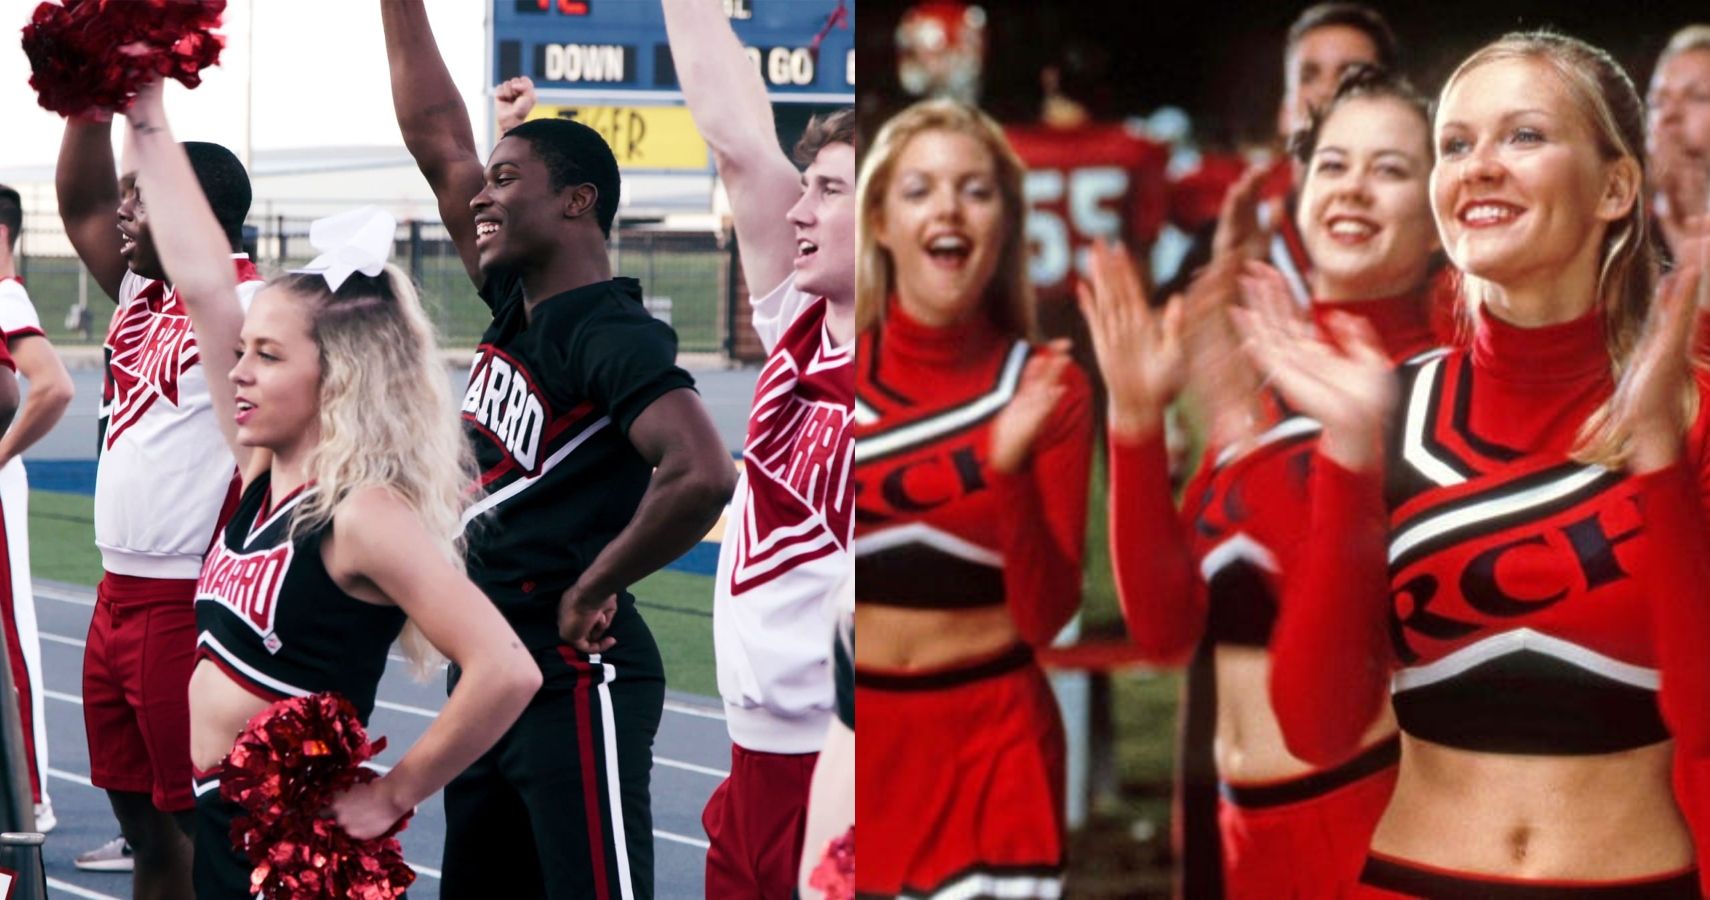 10 REASONS CHEERLEADERS ARE AWESOME